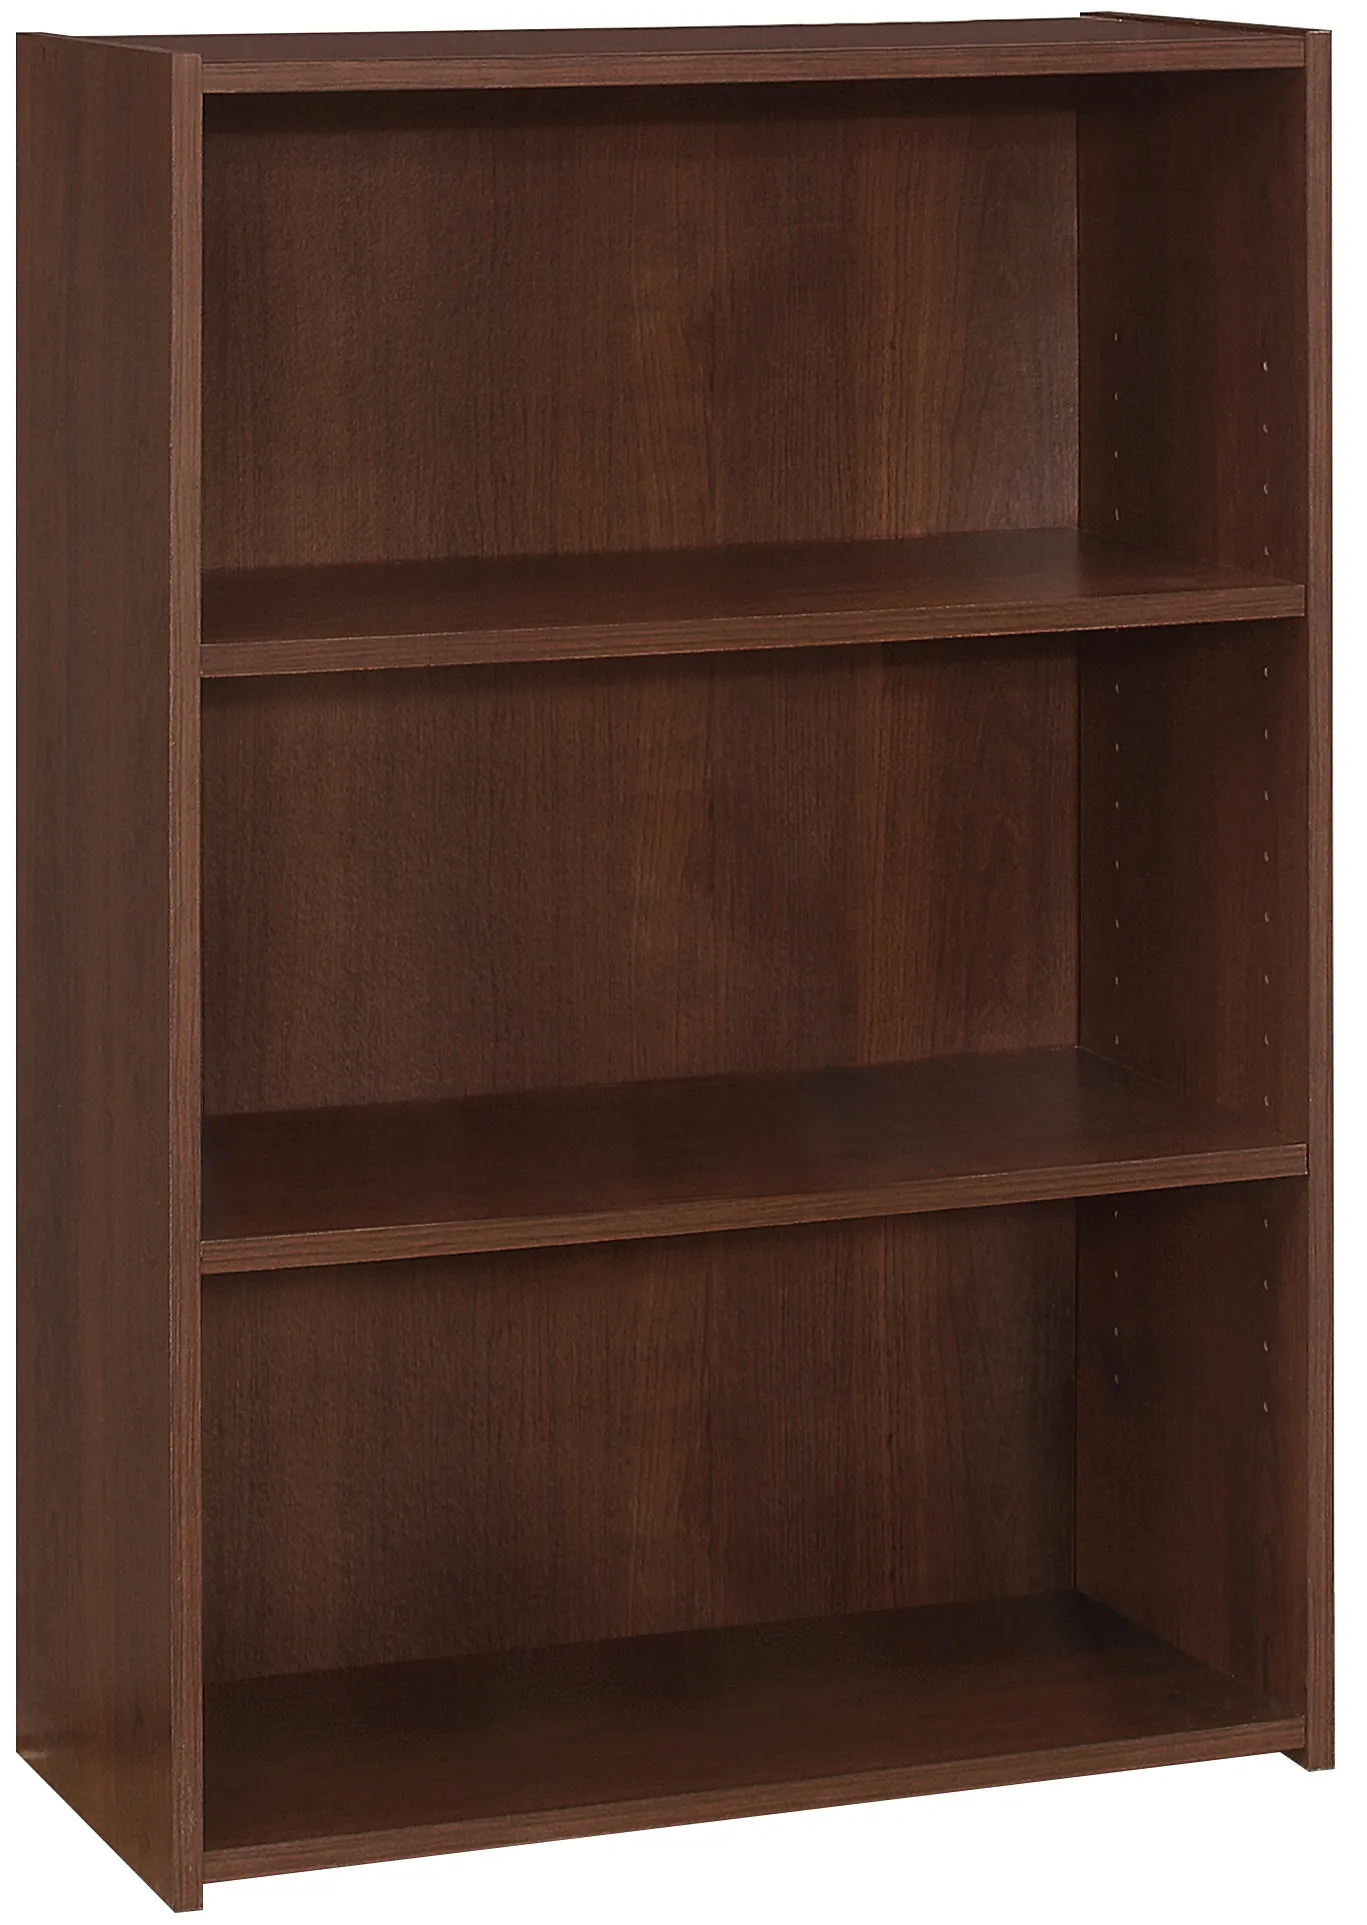 Bookshelf, Bookcase, 4 Tier, 36"H, Office, Bedroom, Laminate, Brown, Transitional